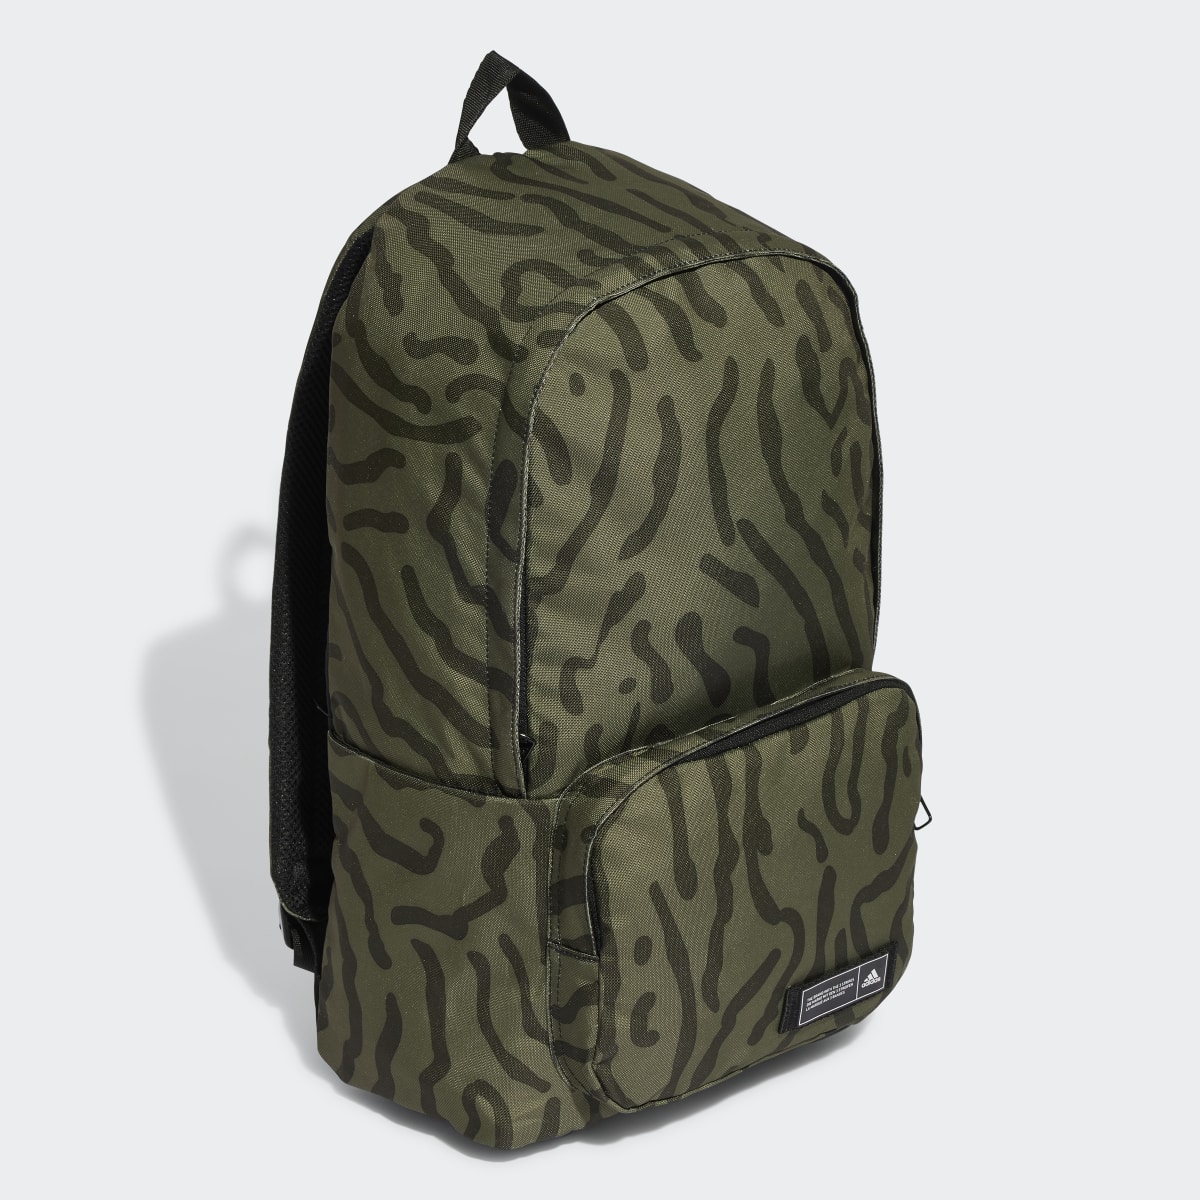 Adidas Classic Texture Graphic Backpack. 4